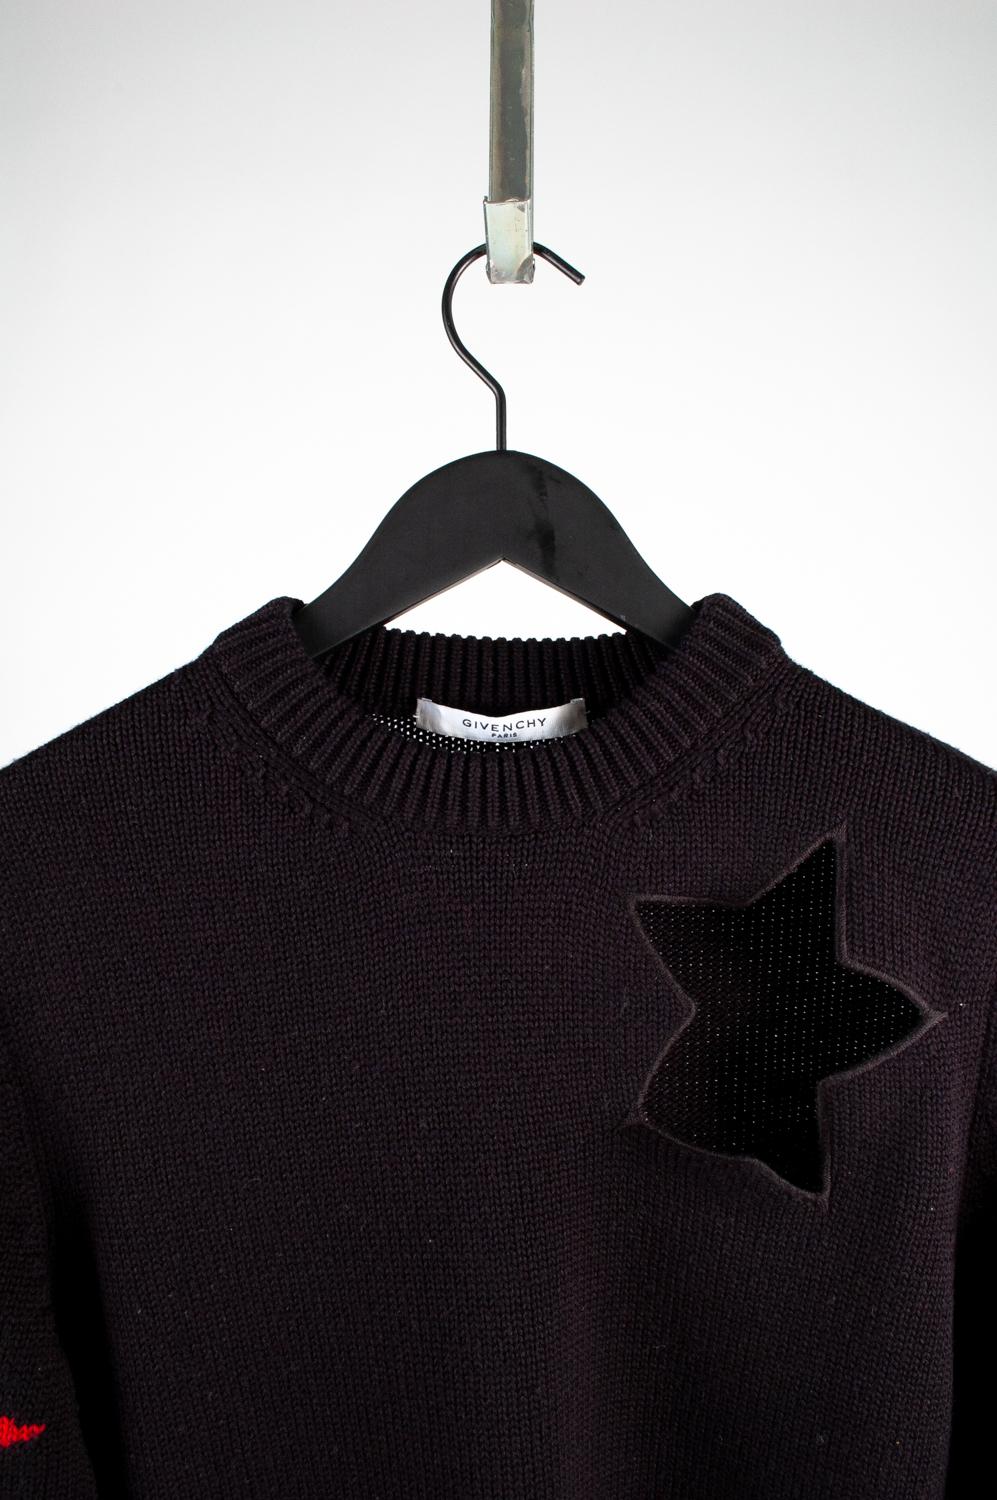 Givenchy Paris Men Sweater AW17 Knit Stars Part Cut-out, Size S/M, S530 In Excellent Condition For Sale In Kaunas, LT